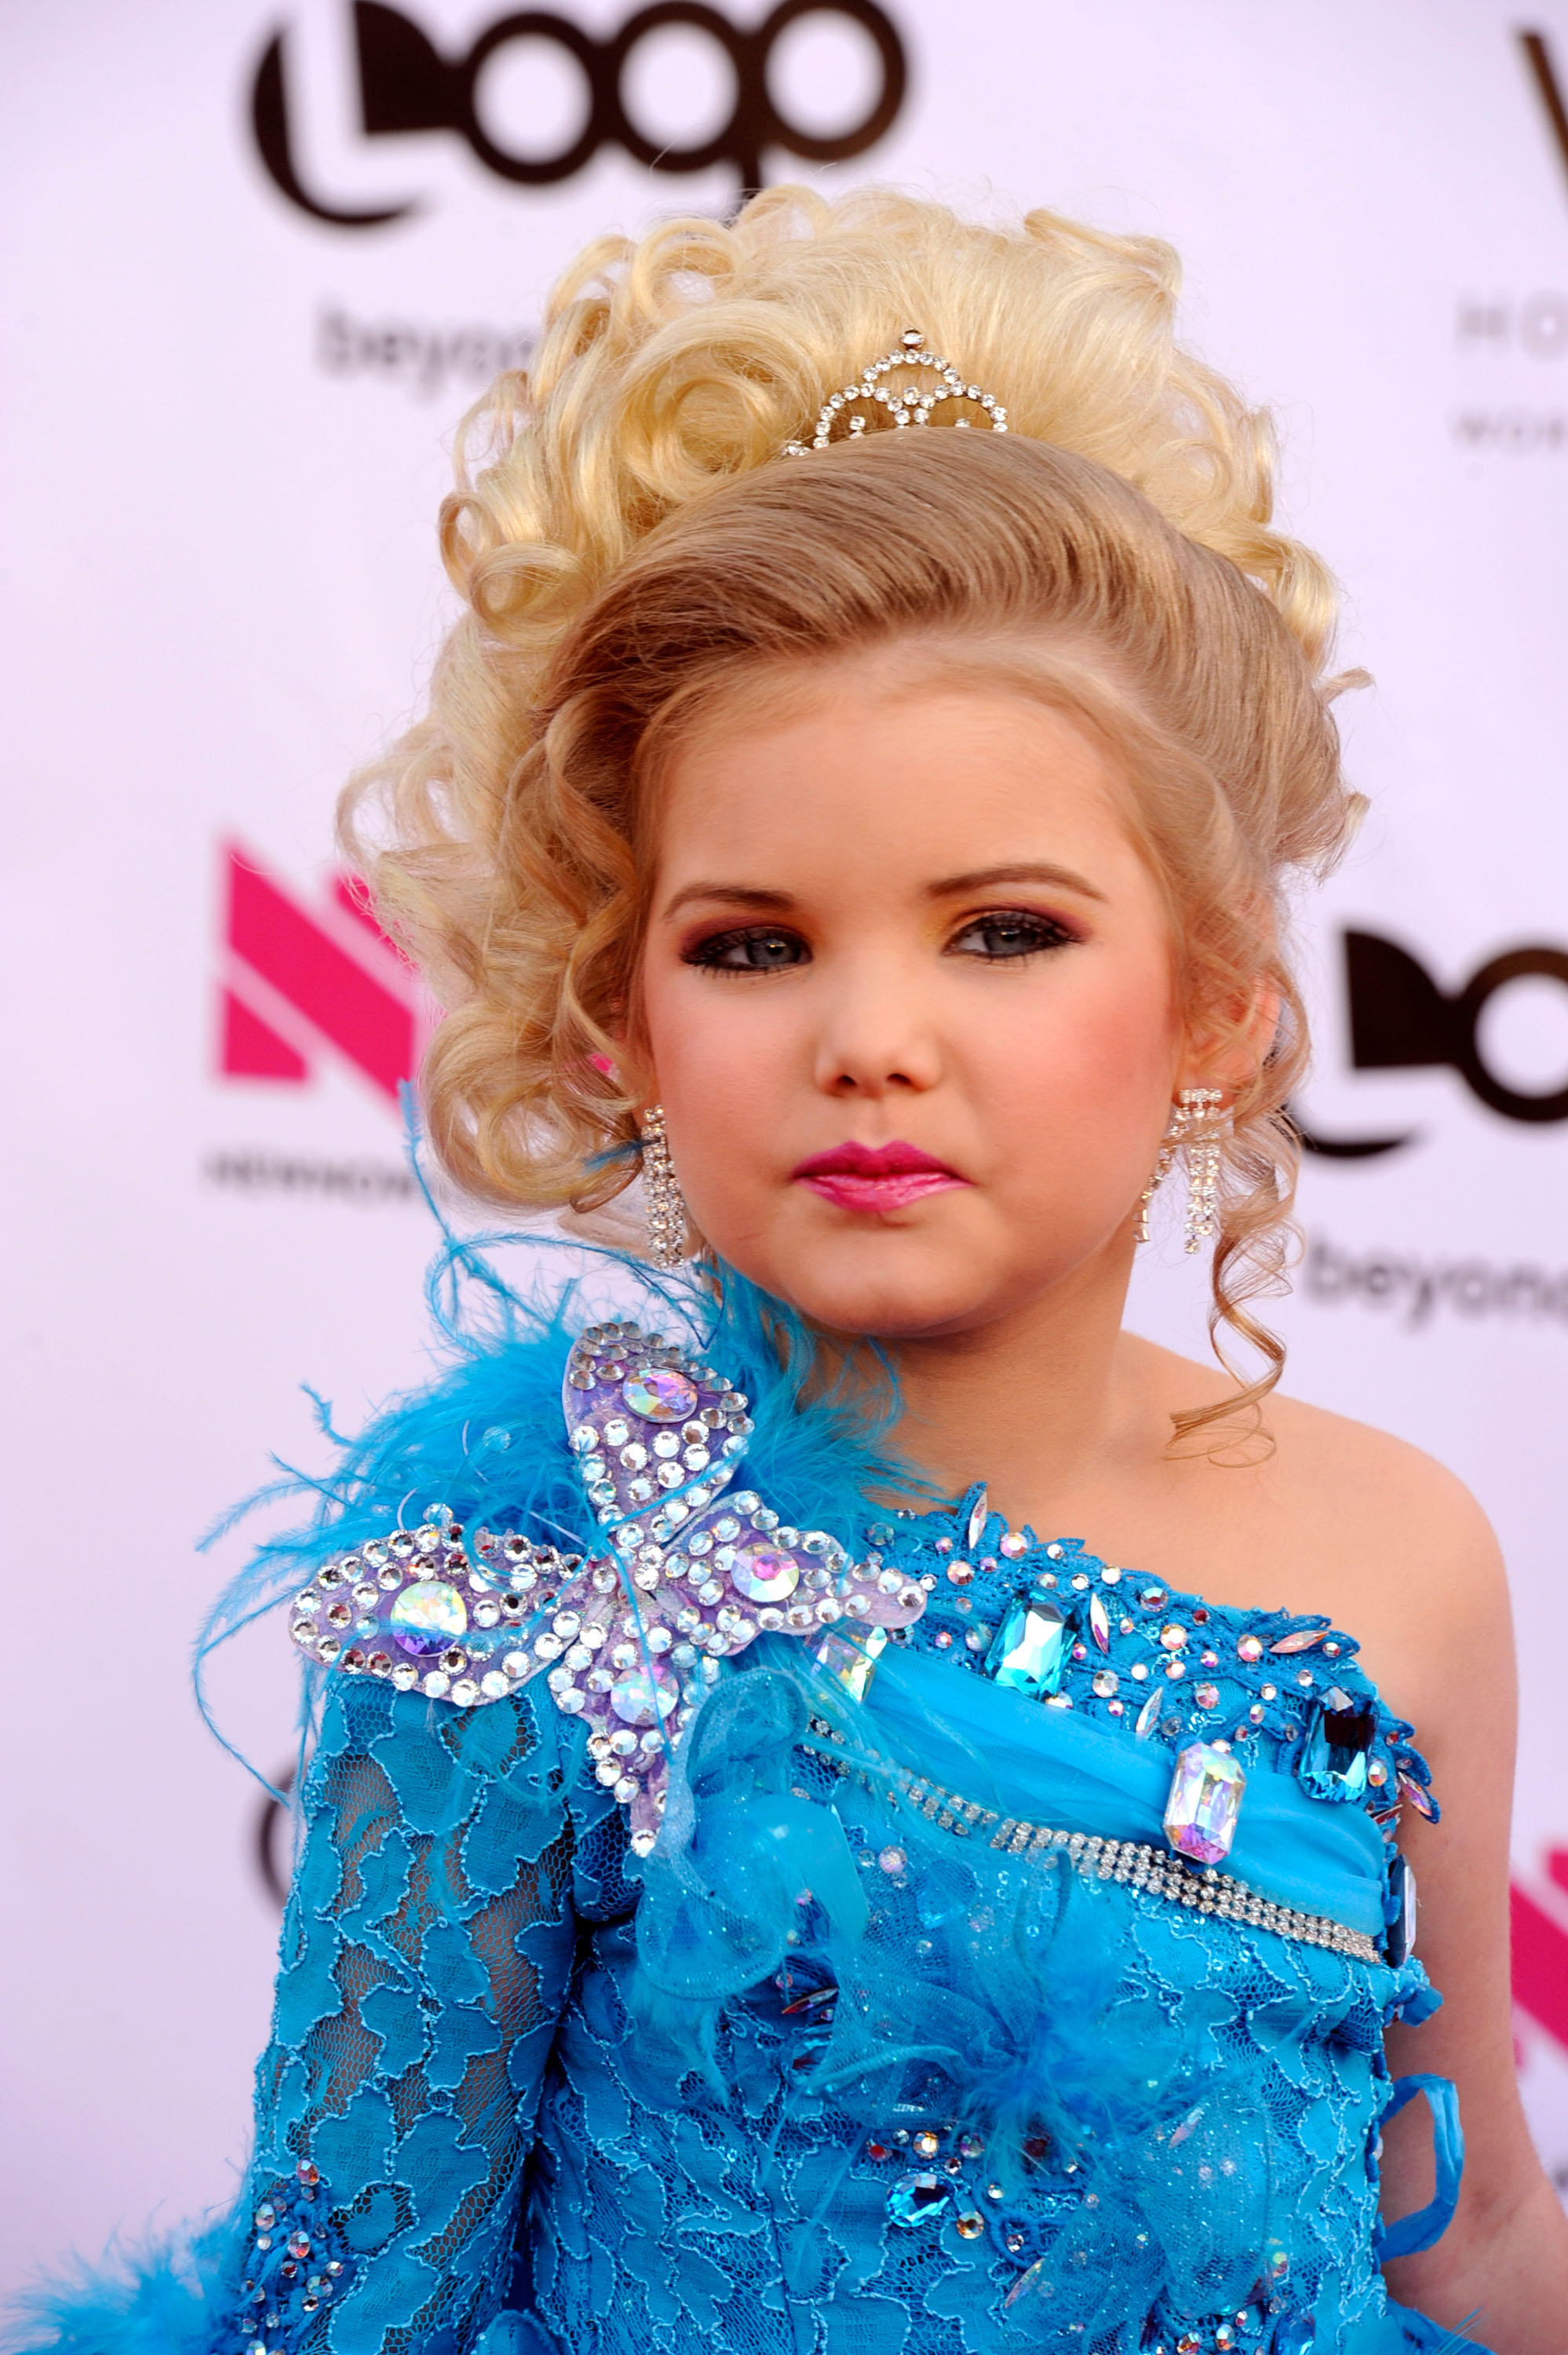 Toddlers and Tiaras Eden Wood